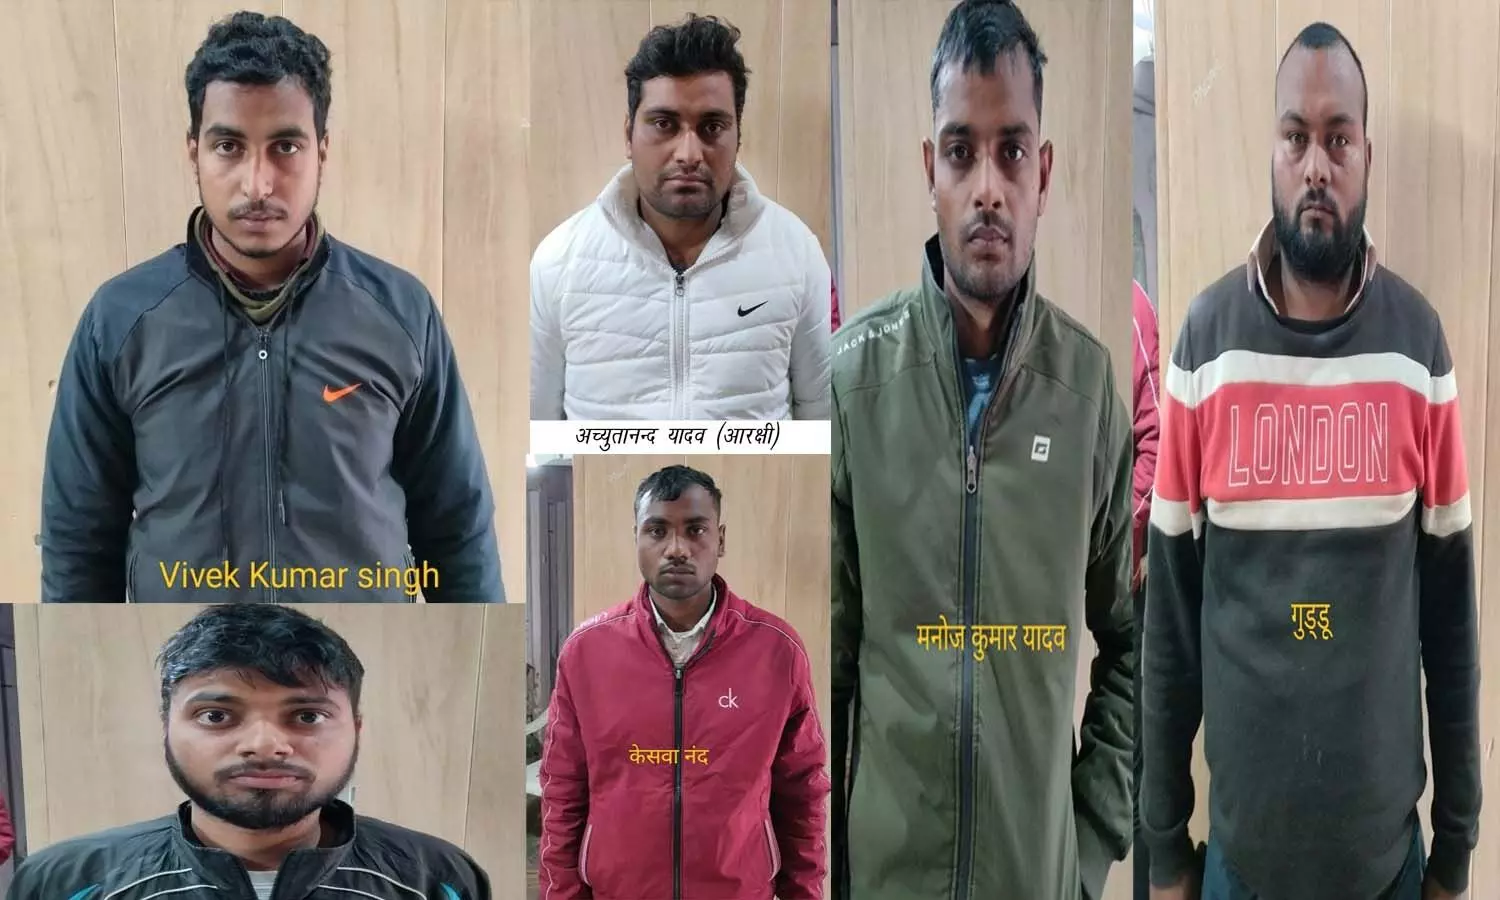 Solver gang exposed: UP police constable was operating solver gang, solvers used to come from Bihar